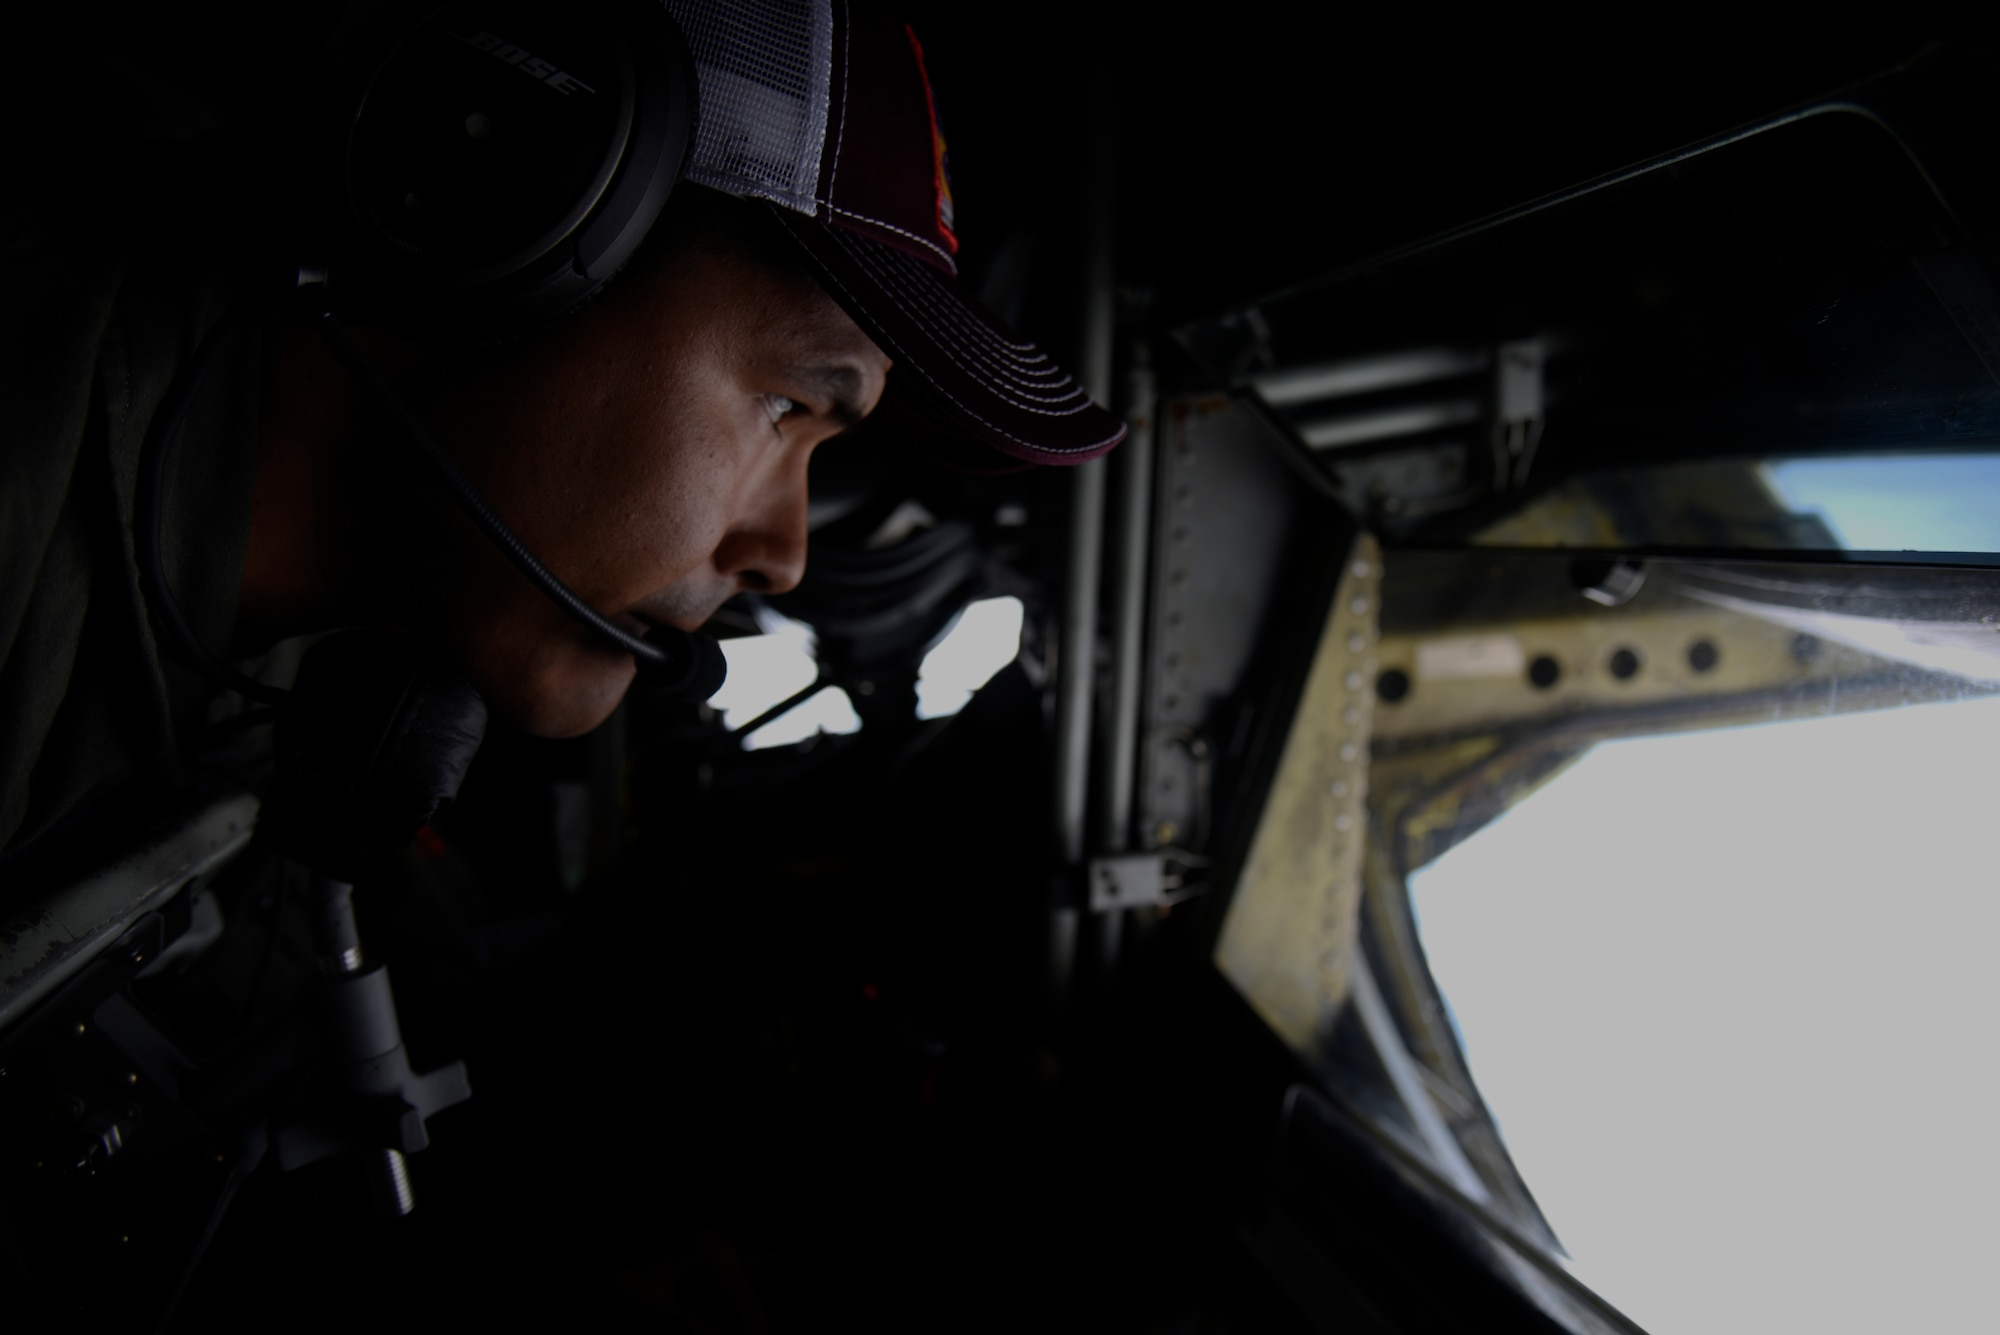 U.S. Air Force Tech. Sgt. Jose Cruz, 384th Air Refueling Squadron boom operator, conducts air refueling during field training exercise Red Flag Alaska 20-3, Aug. 5, 2020. This exercise reinforces the United States’ continued commitment to the region as a Pacific nation, leader and power. (U.S. Air Force photo by Staff Sgt. Jesenia Landaverde)